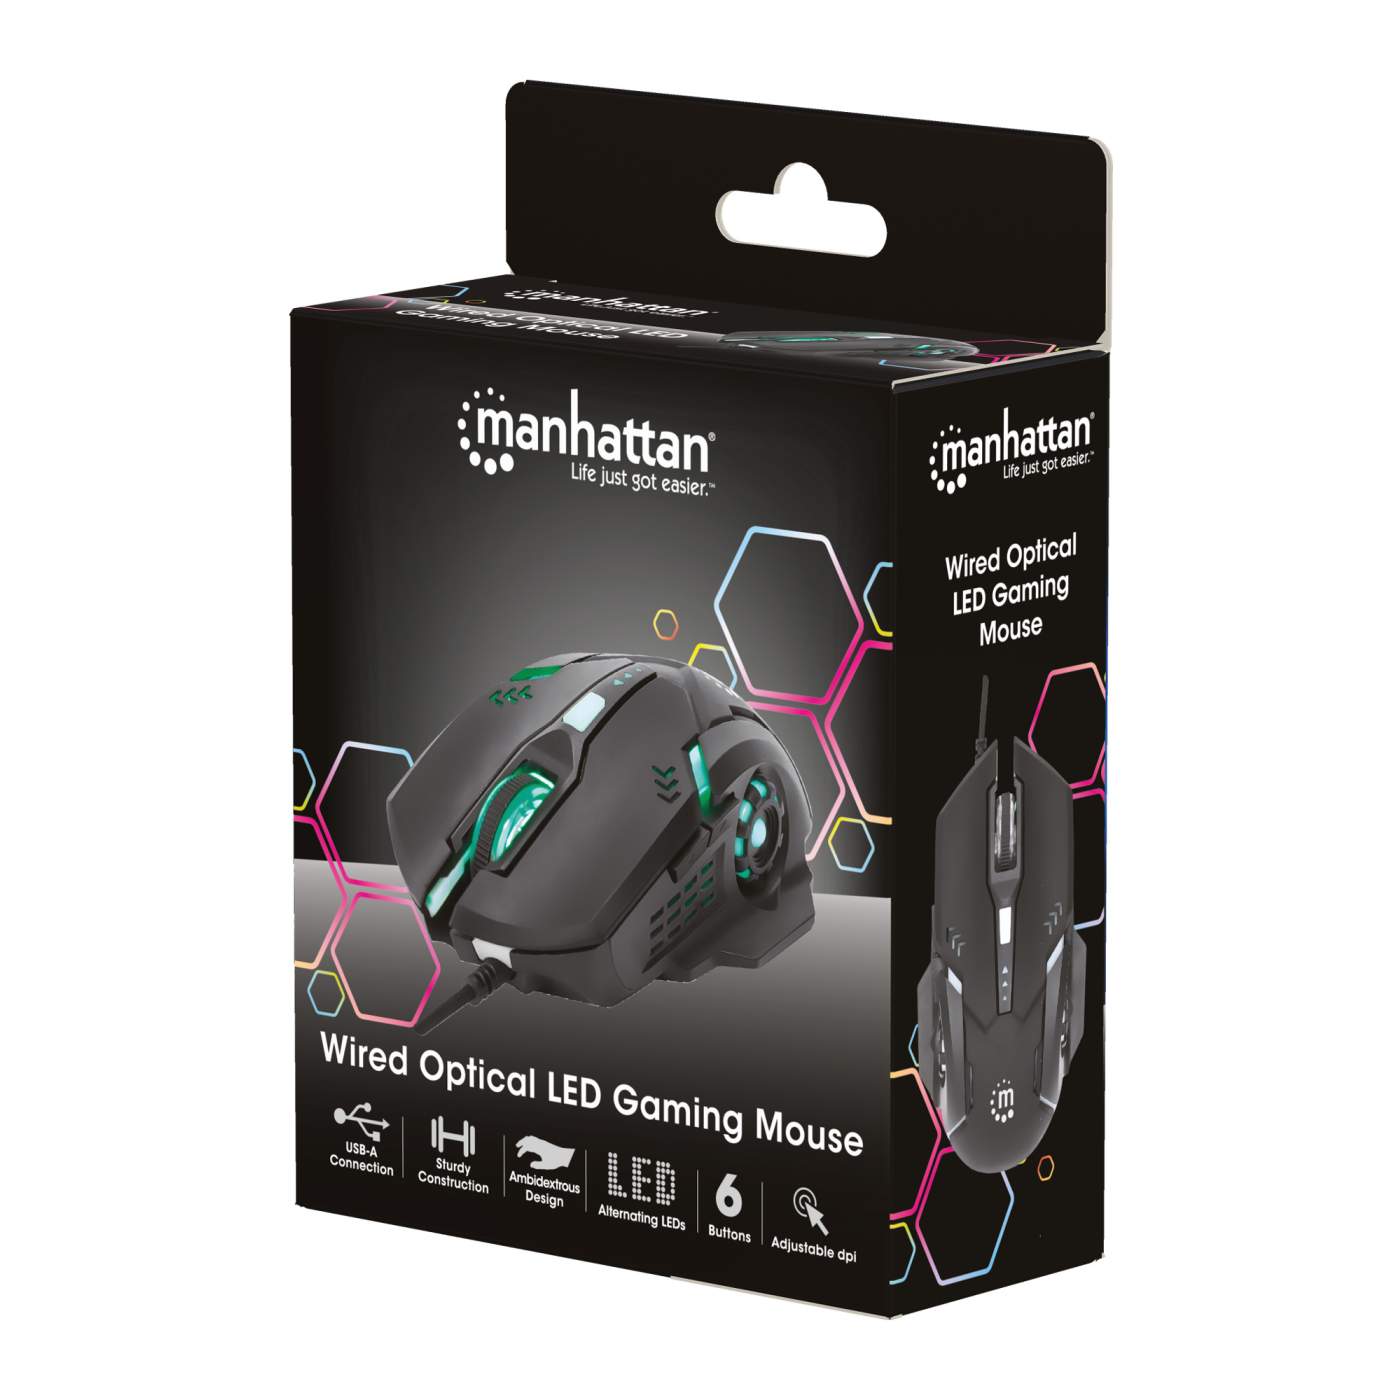 RGB LED Wired Optical USB Gaming Mouse Packaging Image 2